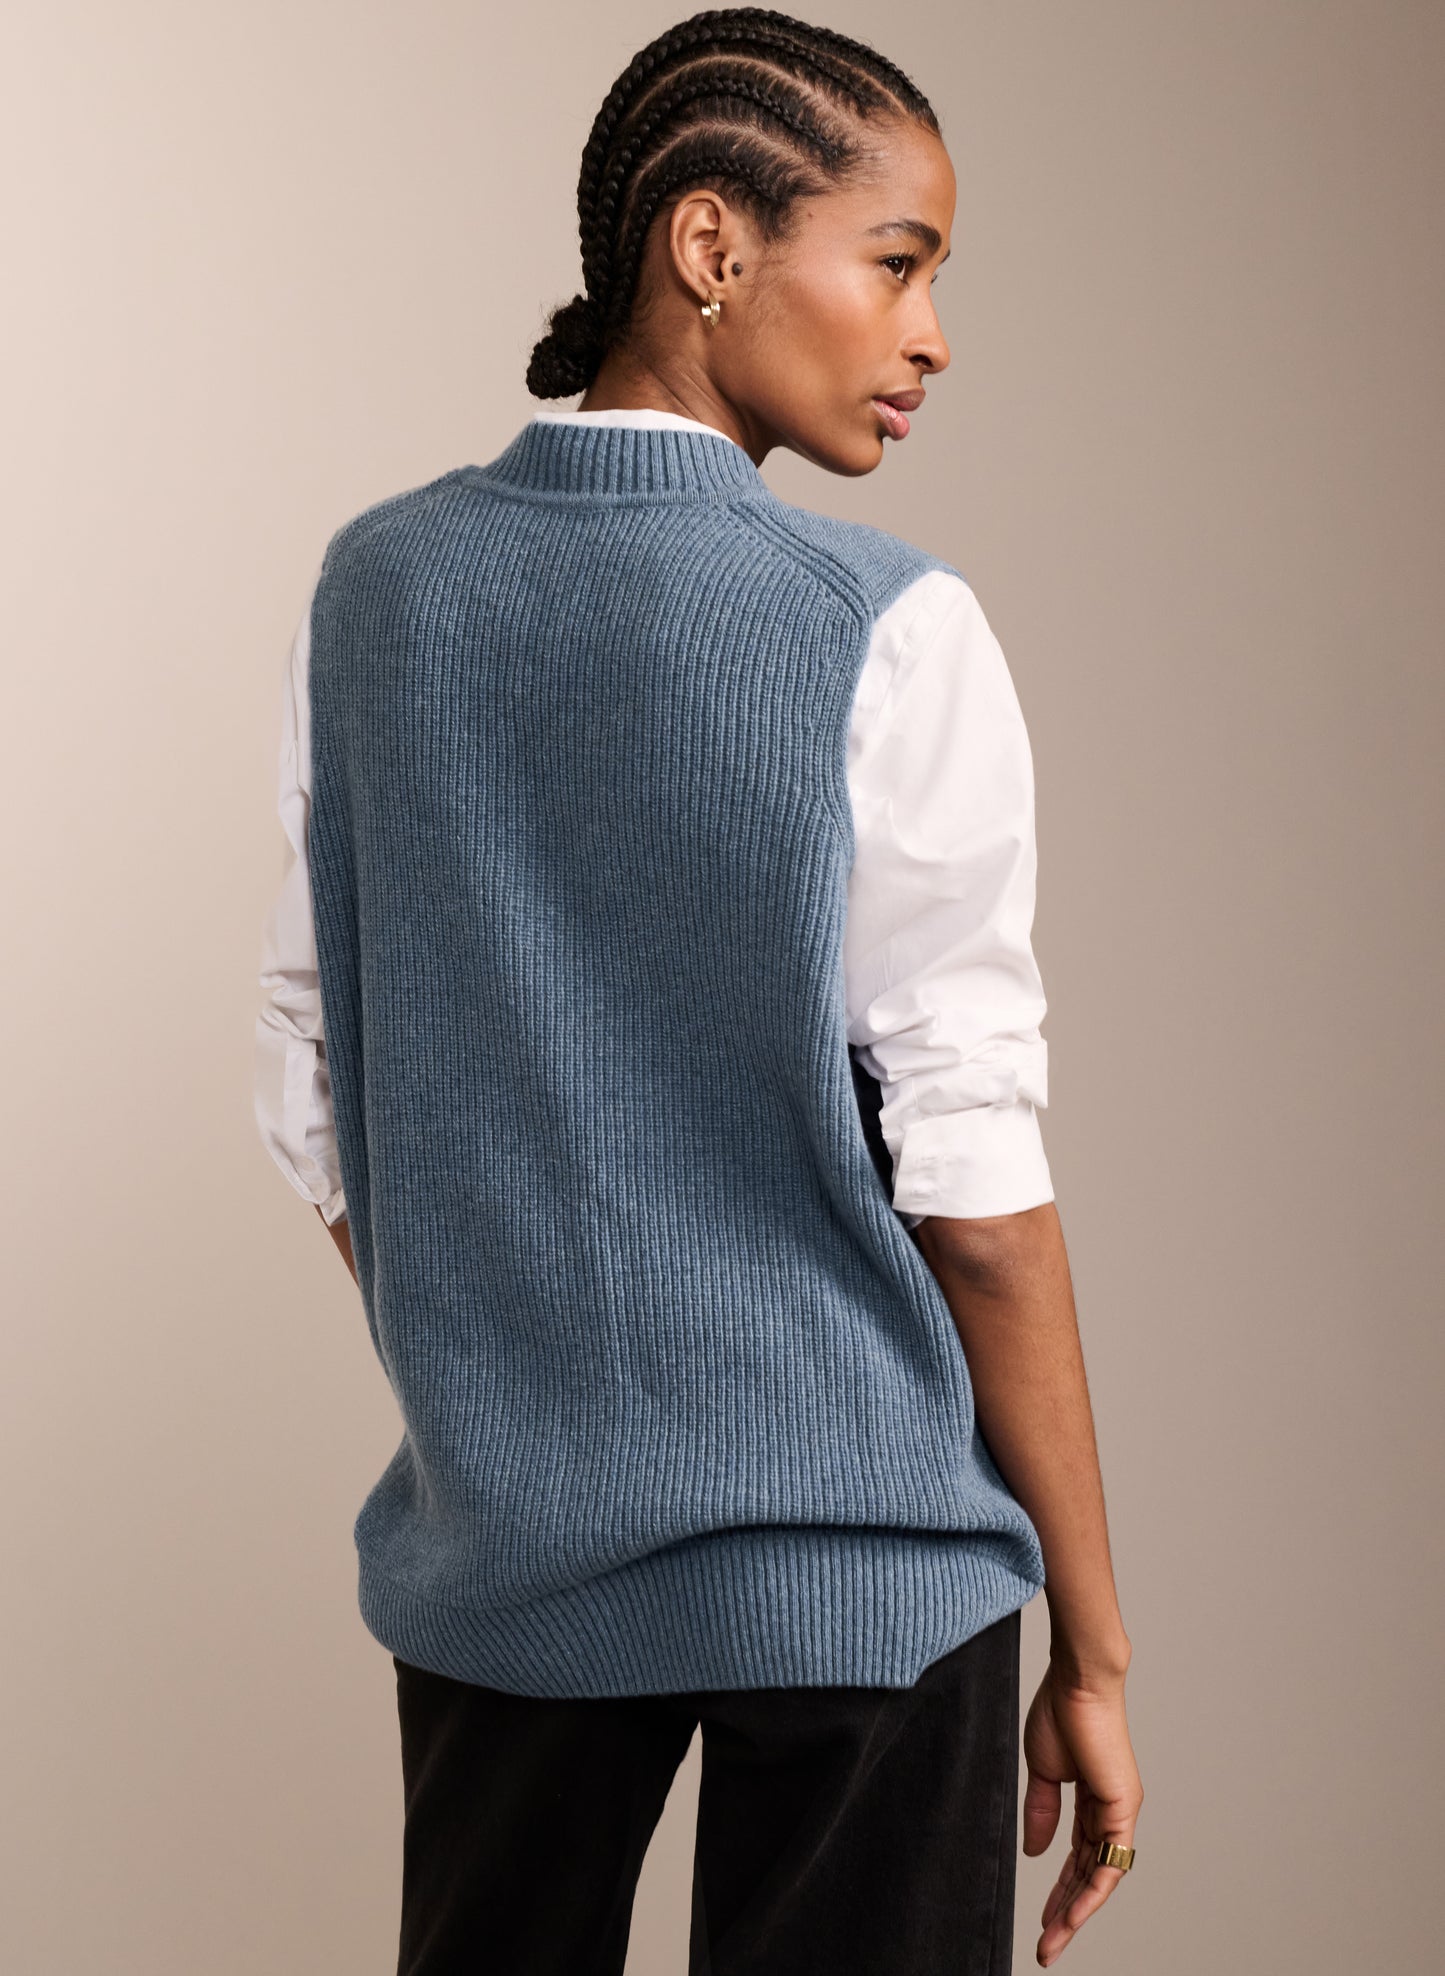 Katalina Wool Knitted Vest